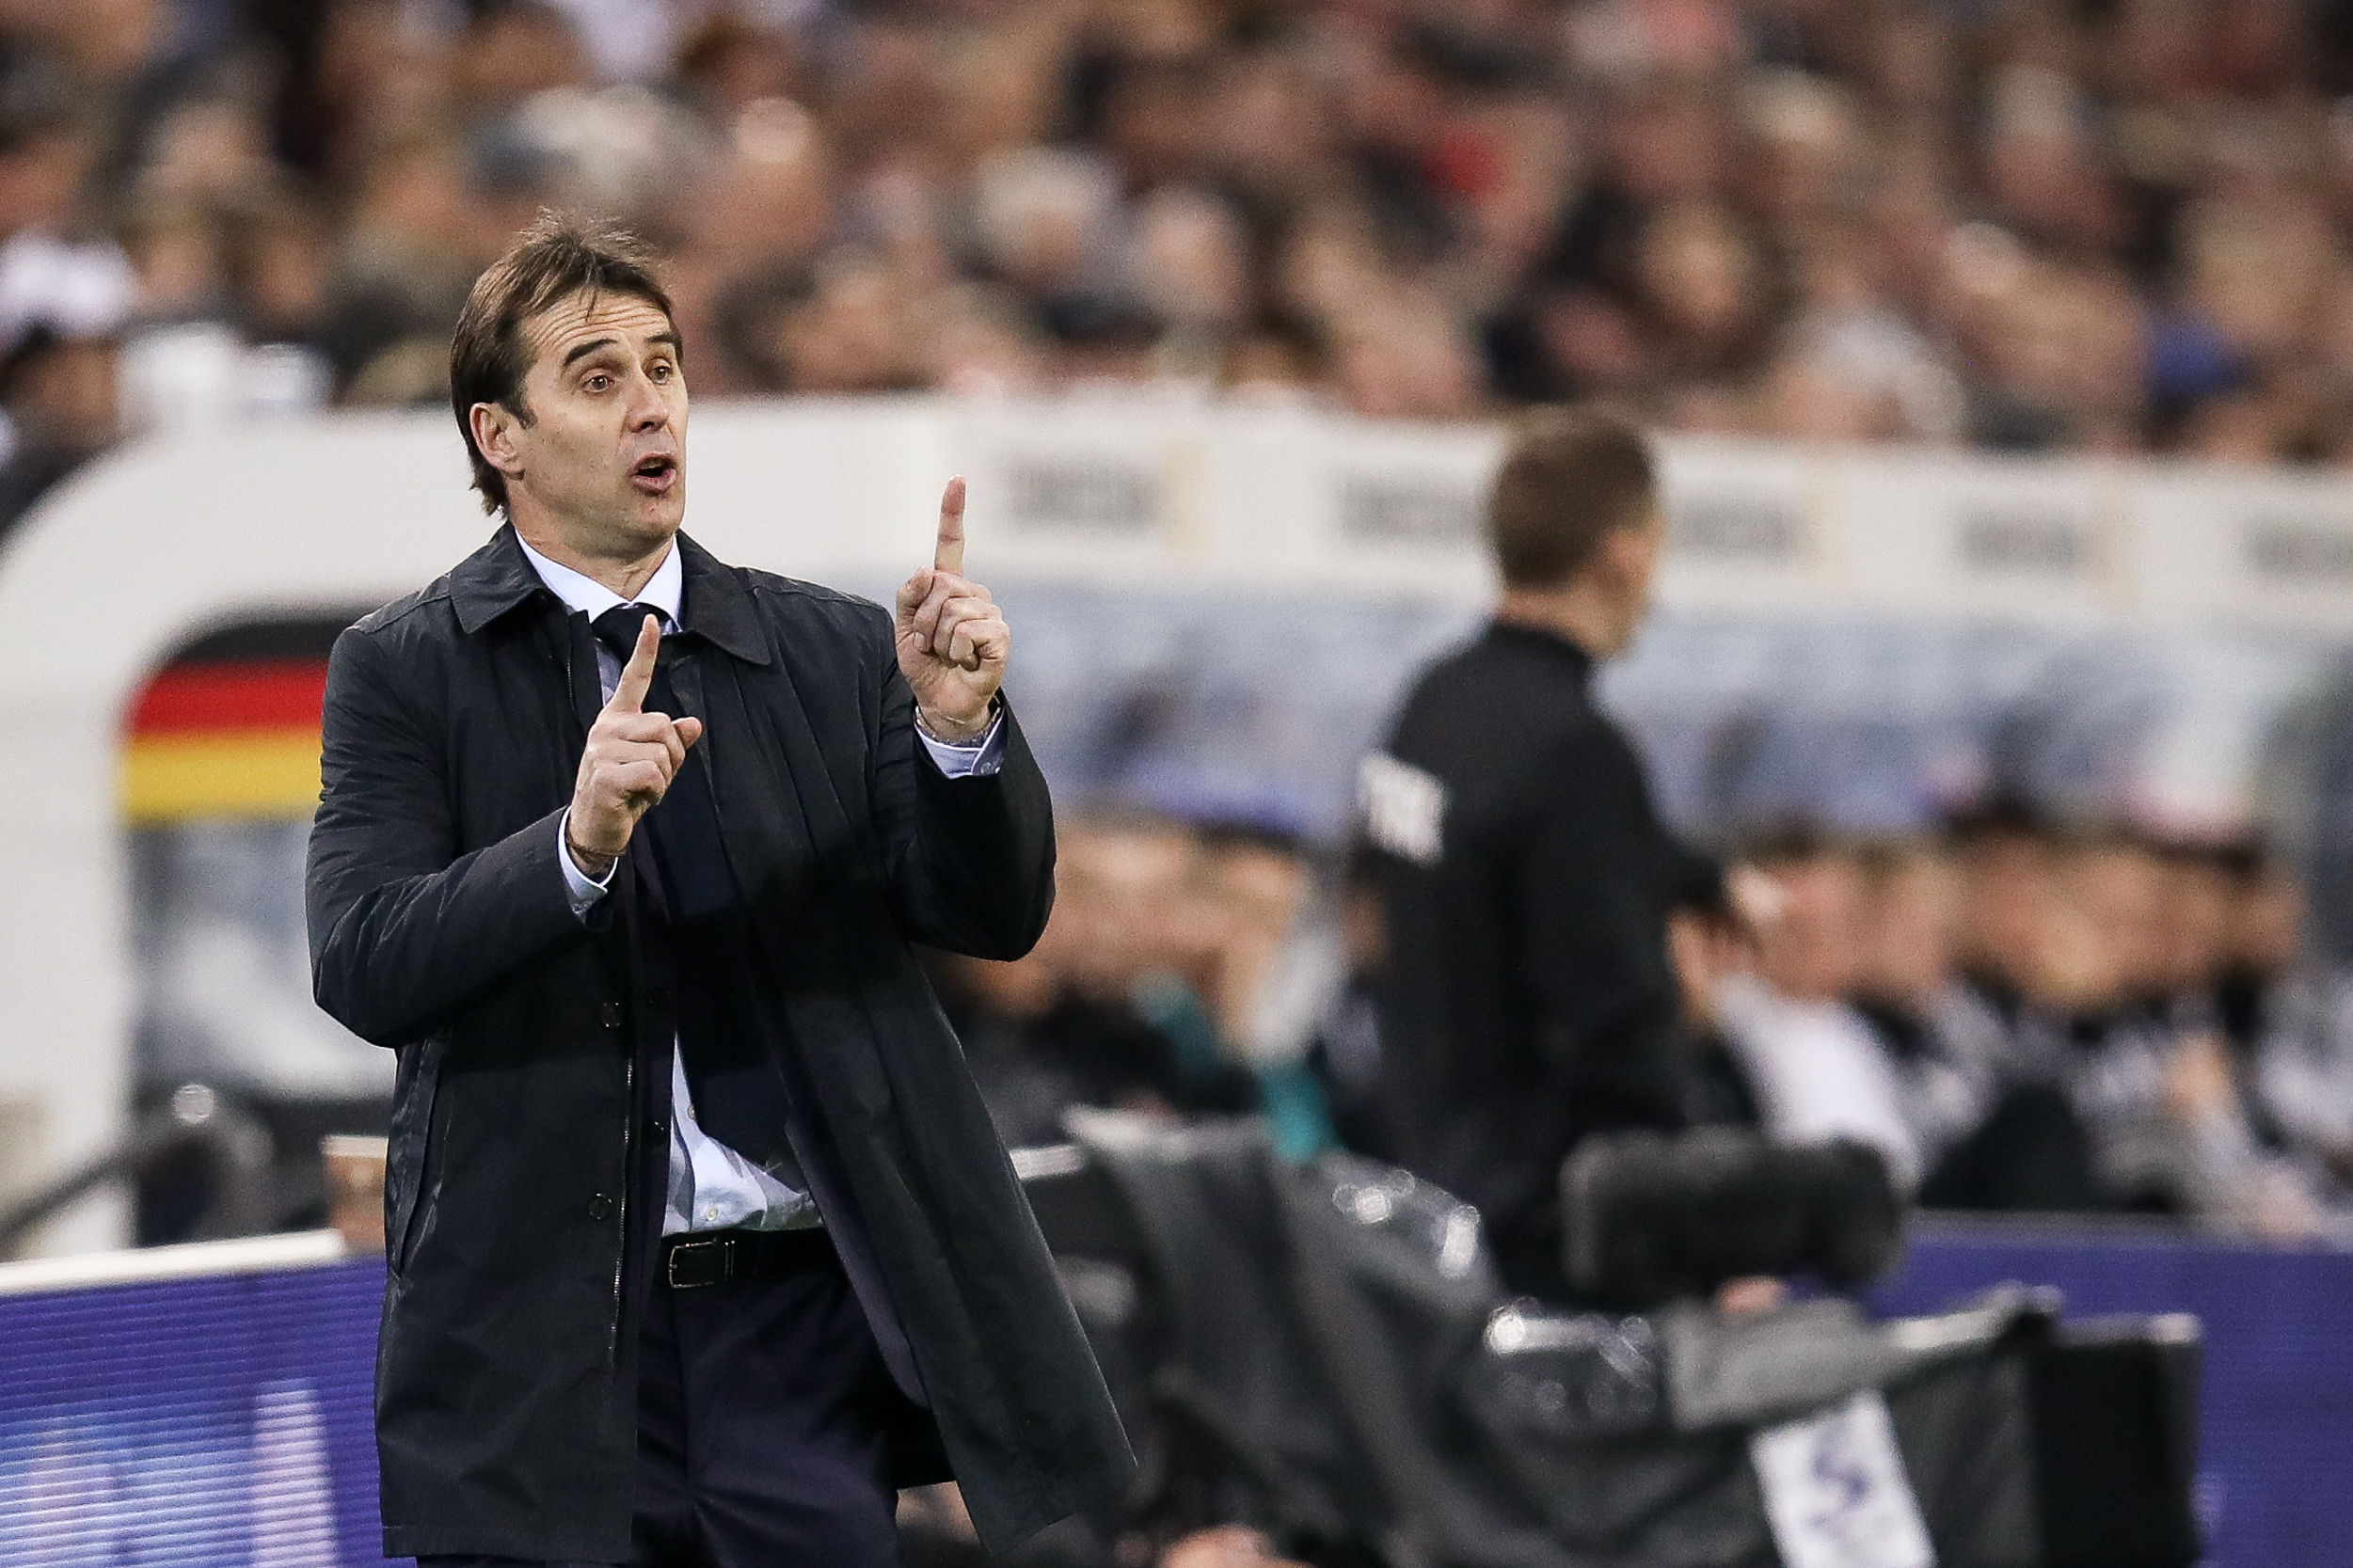 DUESSELDORF, GERMANY - MARCH 23: Head coach Julen Lopetegui reacts during the International friendly match between Germany and Spain at Esprit-Arena on March 23, 2018 in Duesseldorf, Germany. (Photo by Maja Hitij/Bongarts/Getty Images)